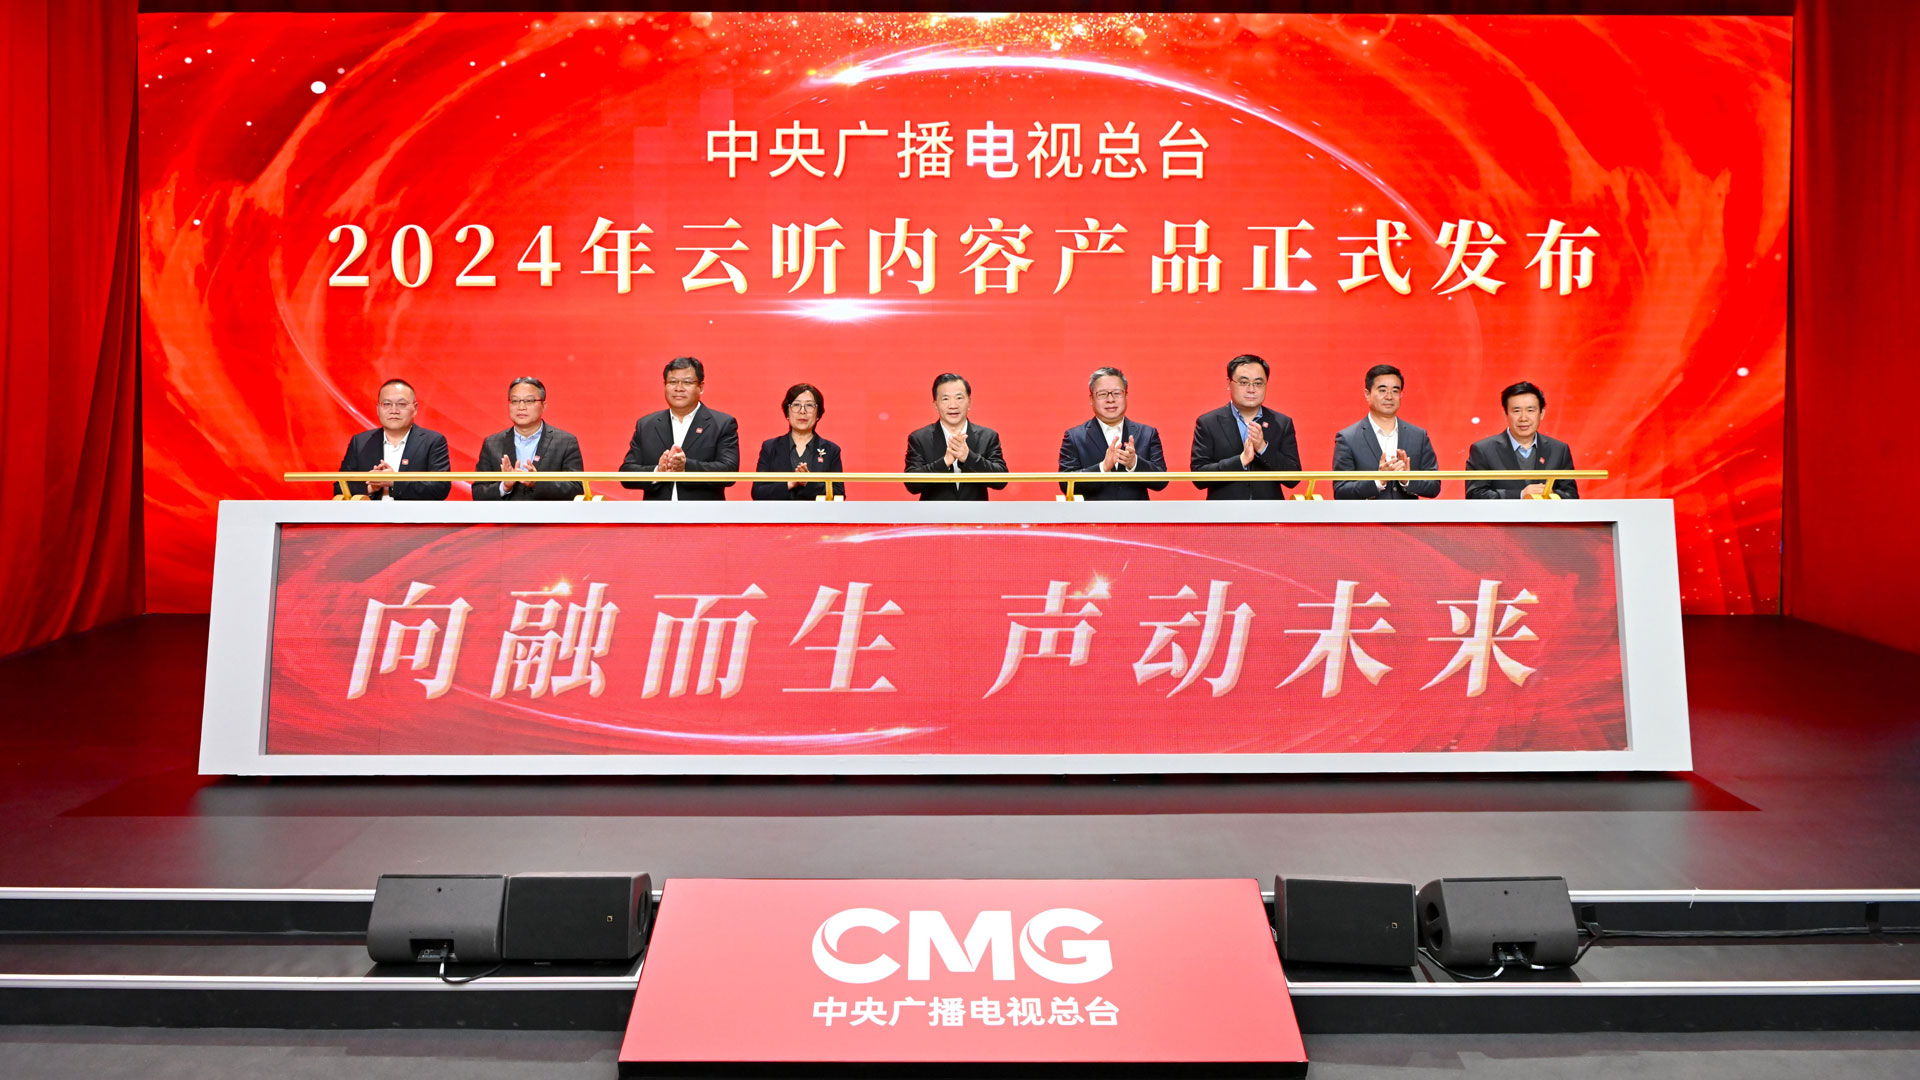 CMG President Shen Haixiong unveils the new content for Yunting online audio streaming service with invited guests, Beijing, China, February 27, 2024. /CMG